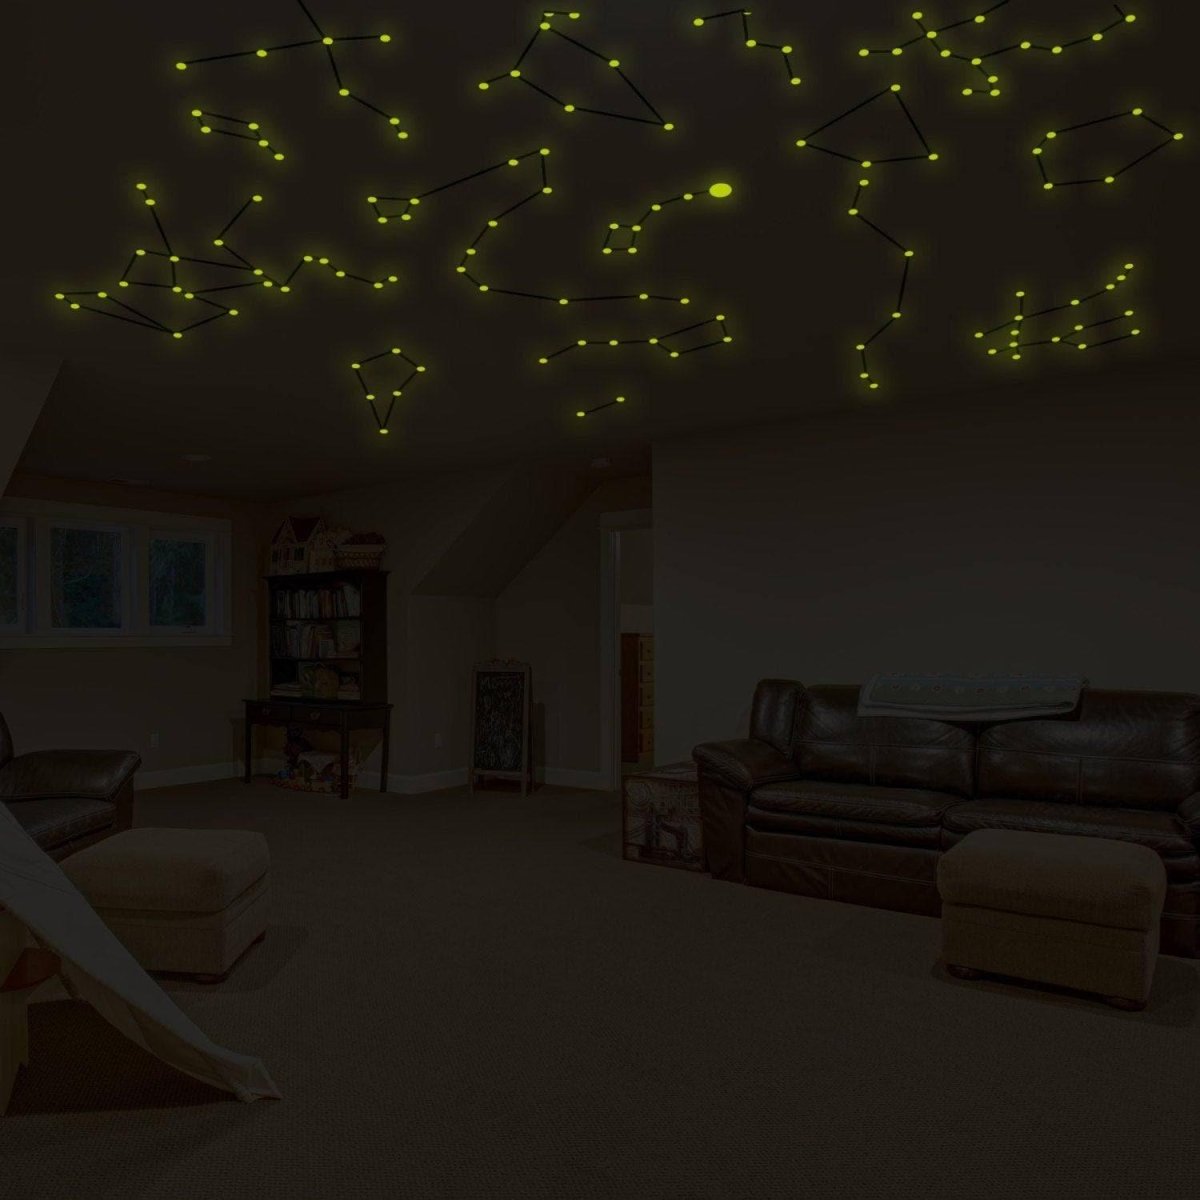 Luminary Constellation Ceiling Decal Kit - Decords